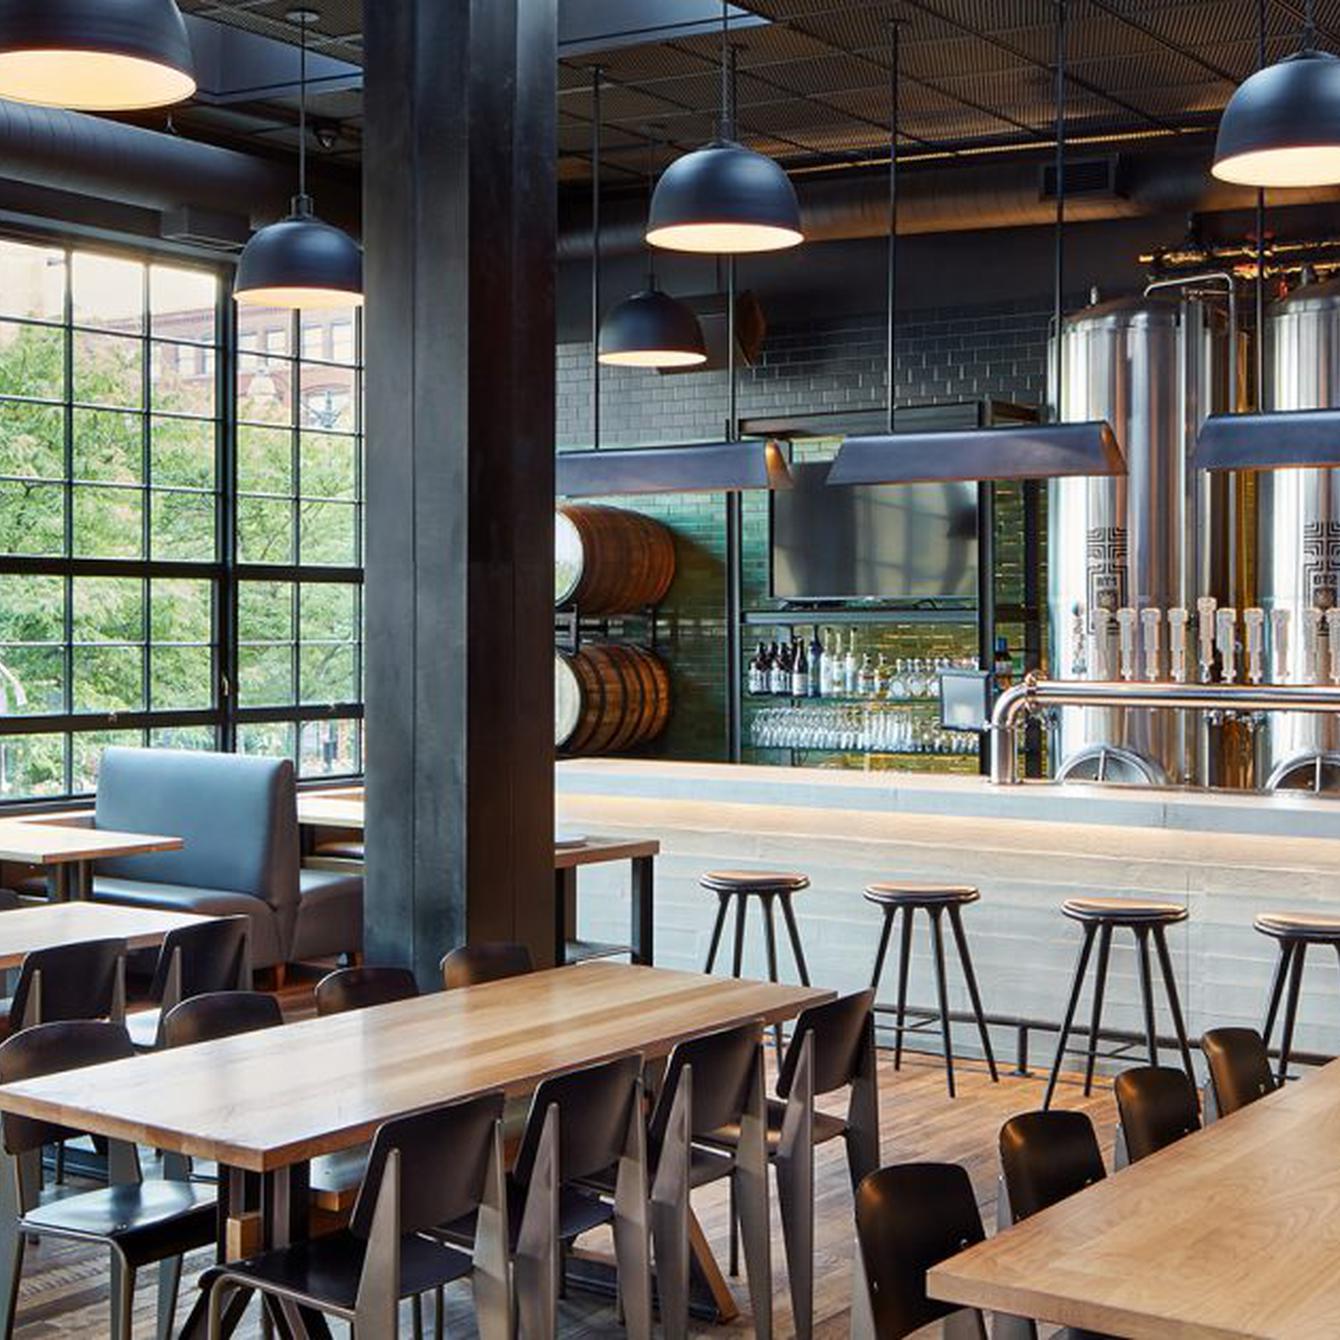 Why You Should Host Your Next Event at a Brewery